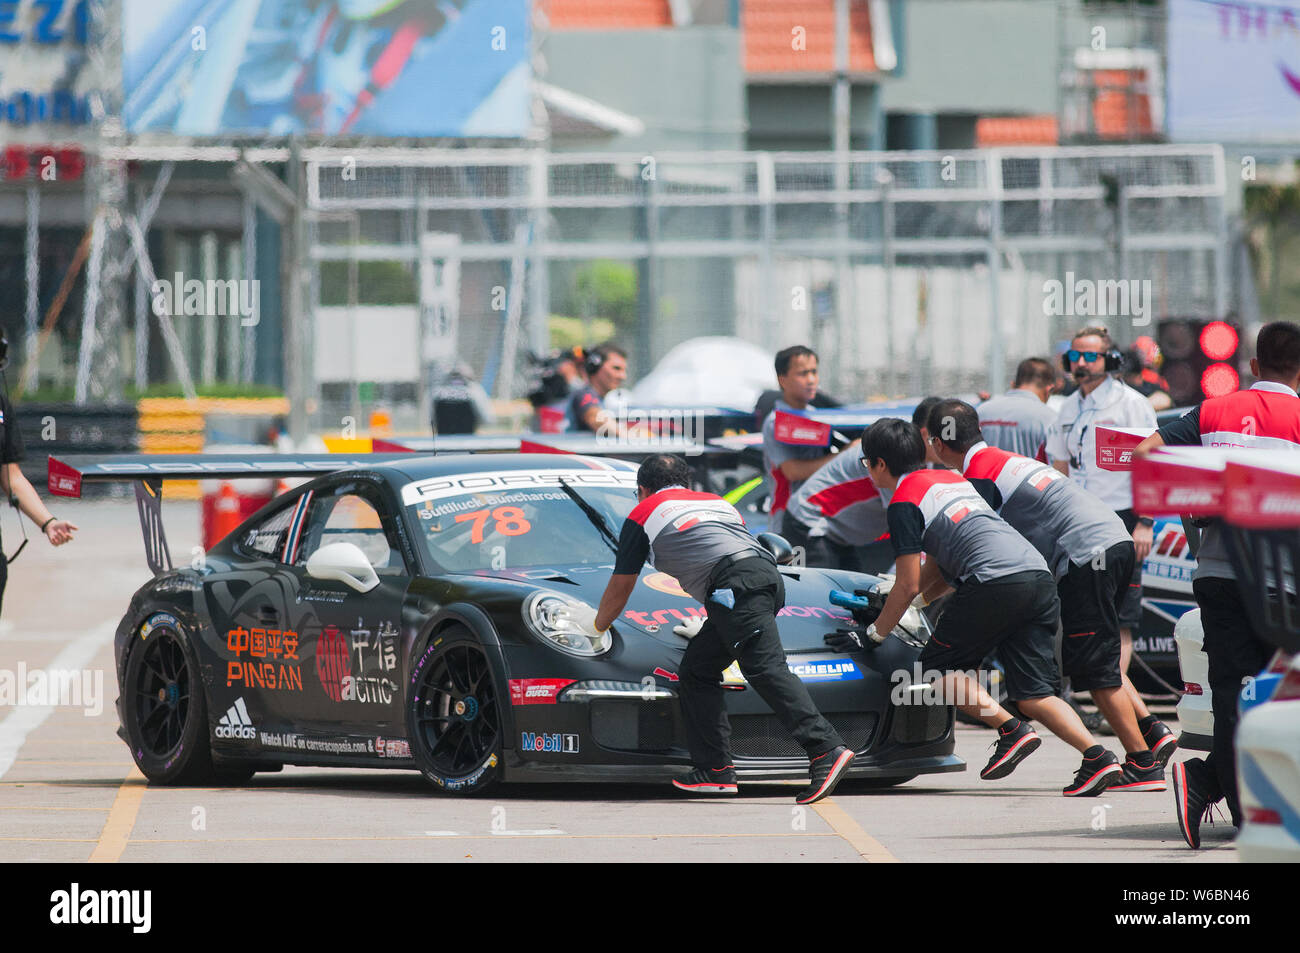 Bang Saen, Thailand - July 1, 2017: The Porsche GT3 Cup of Suttiluck Buncharoen from Thailand being pushed at the pit lane during Porsche Carrera Cup Stock Photo